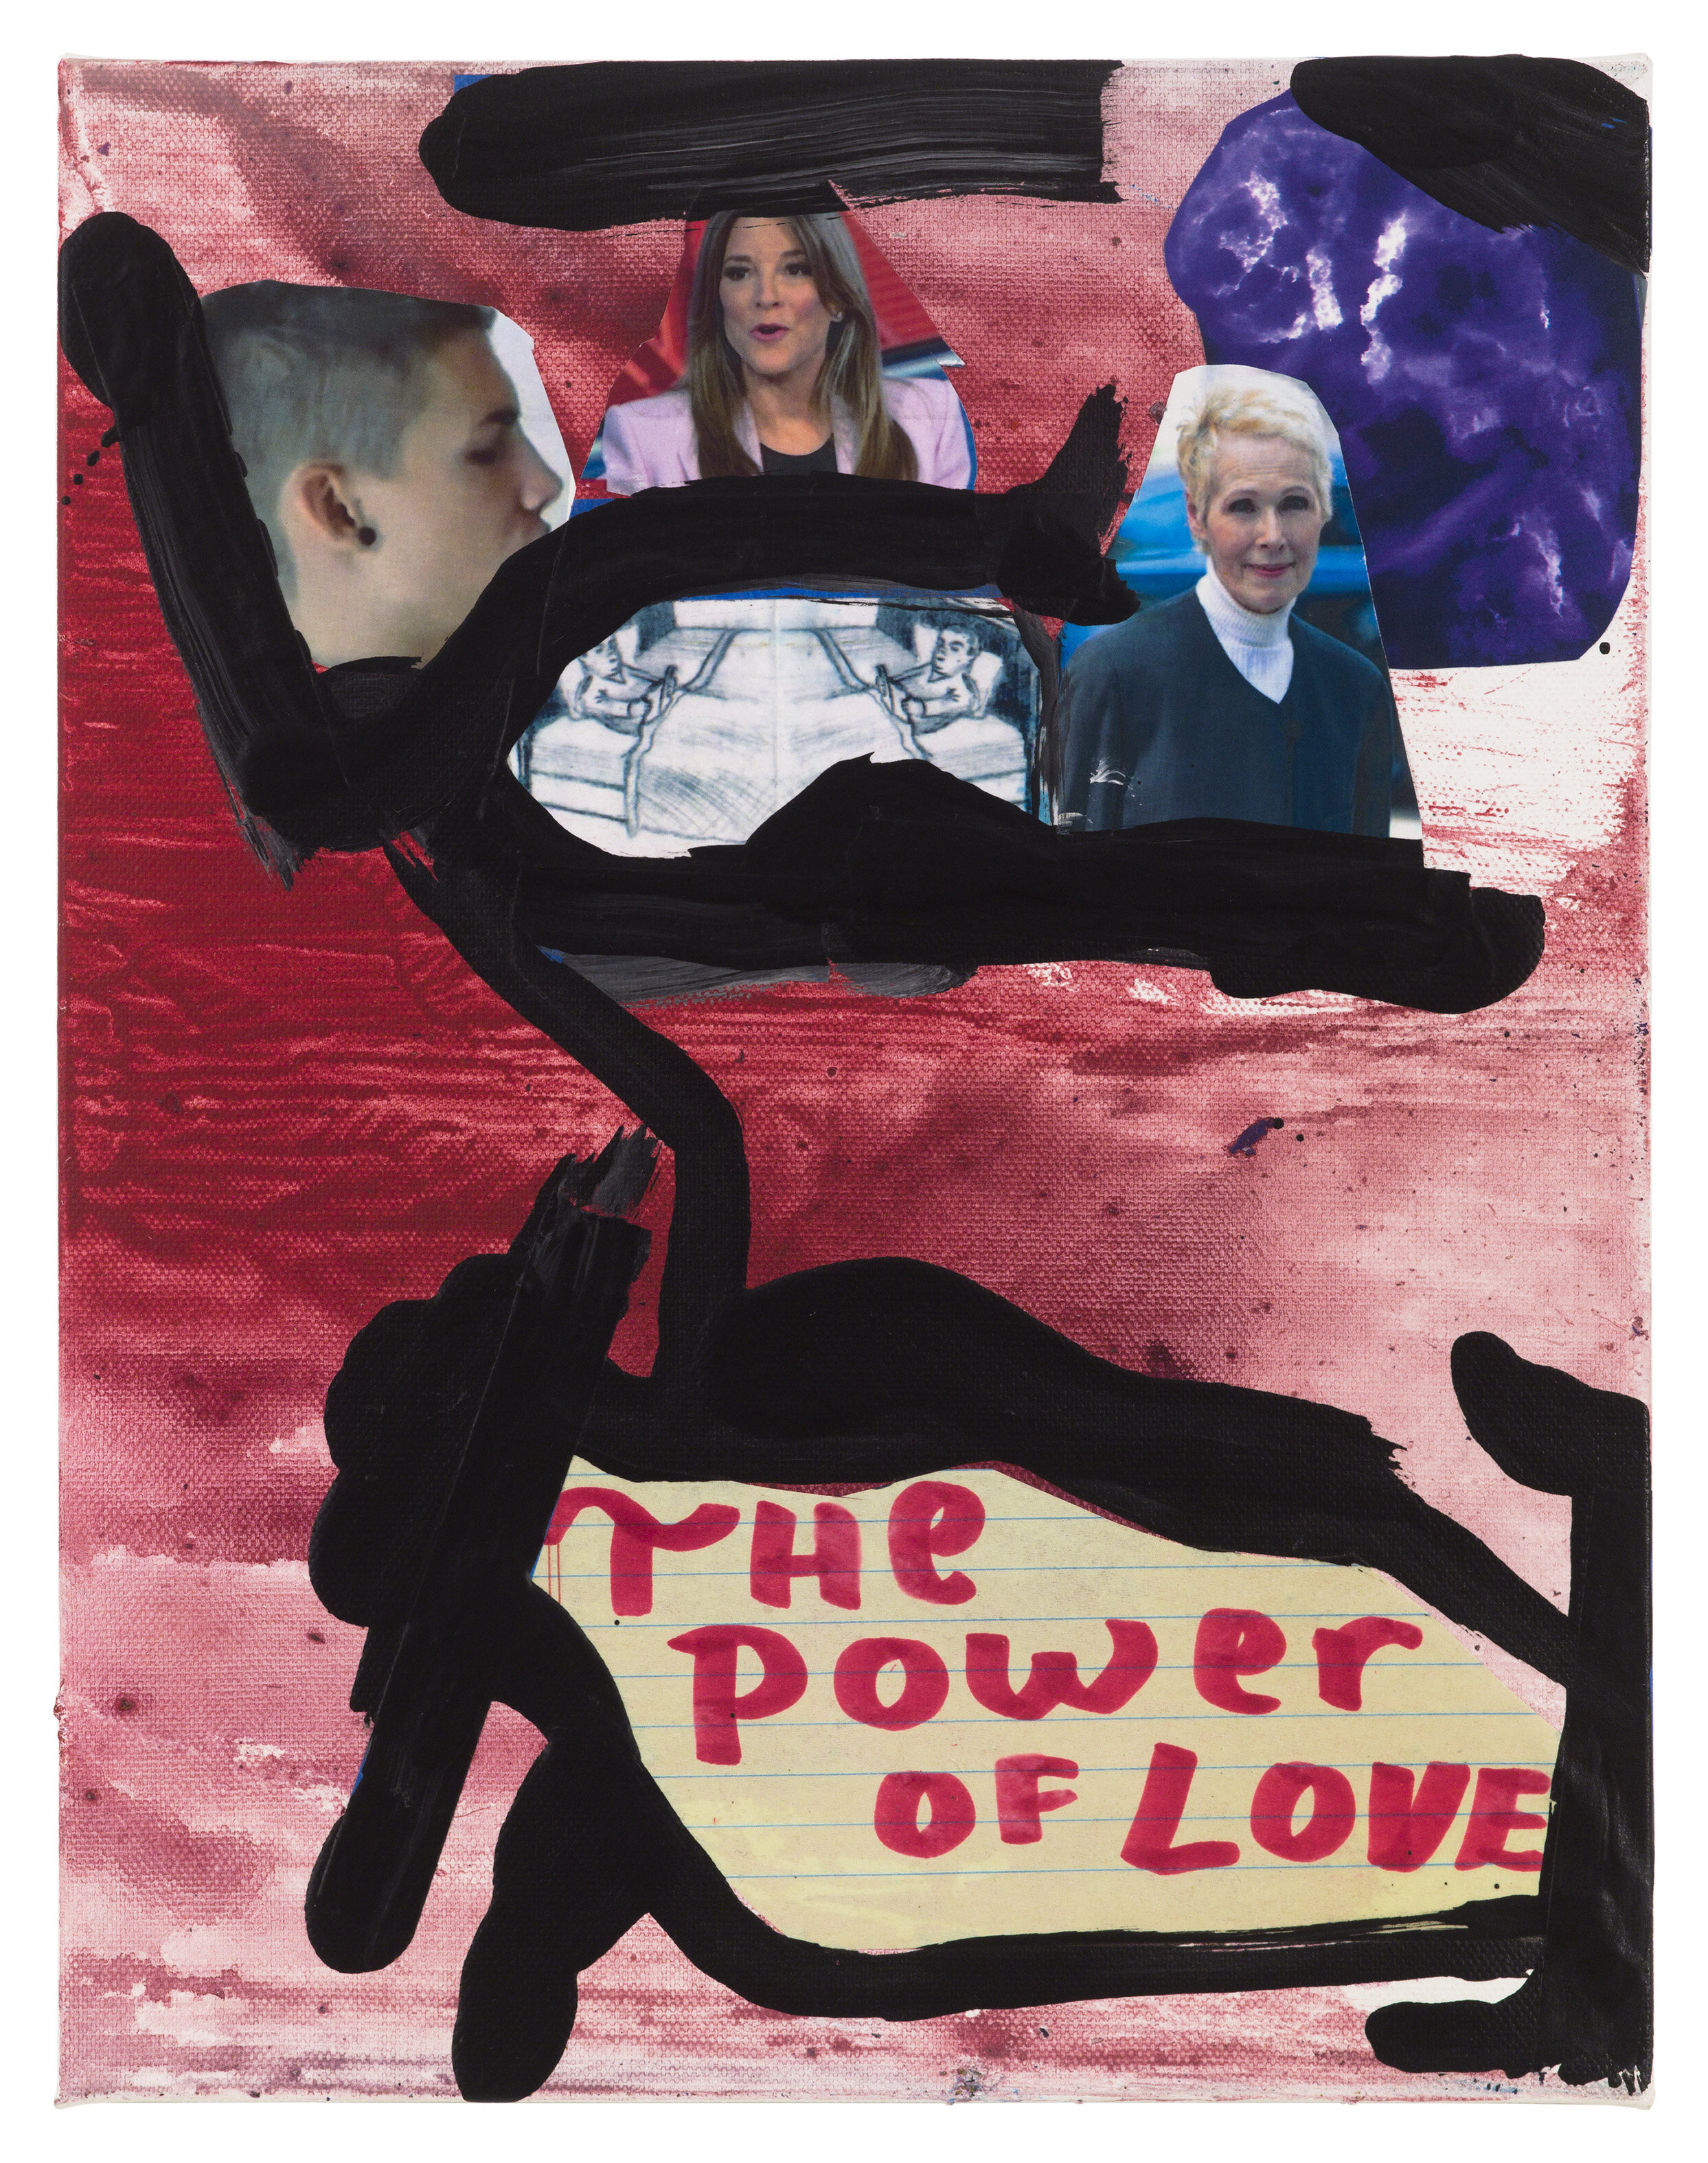  Drew Beattie and Ben Shepard  The Power of Love   2019 acrylic and collage on canvas 14 x 11 inches 